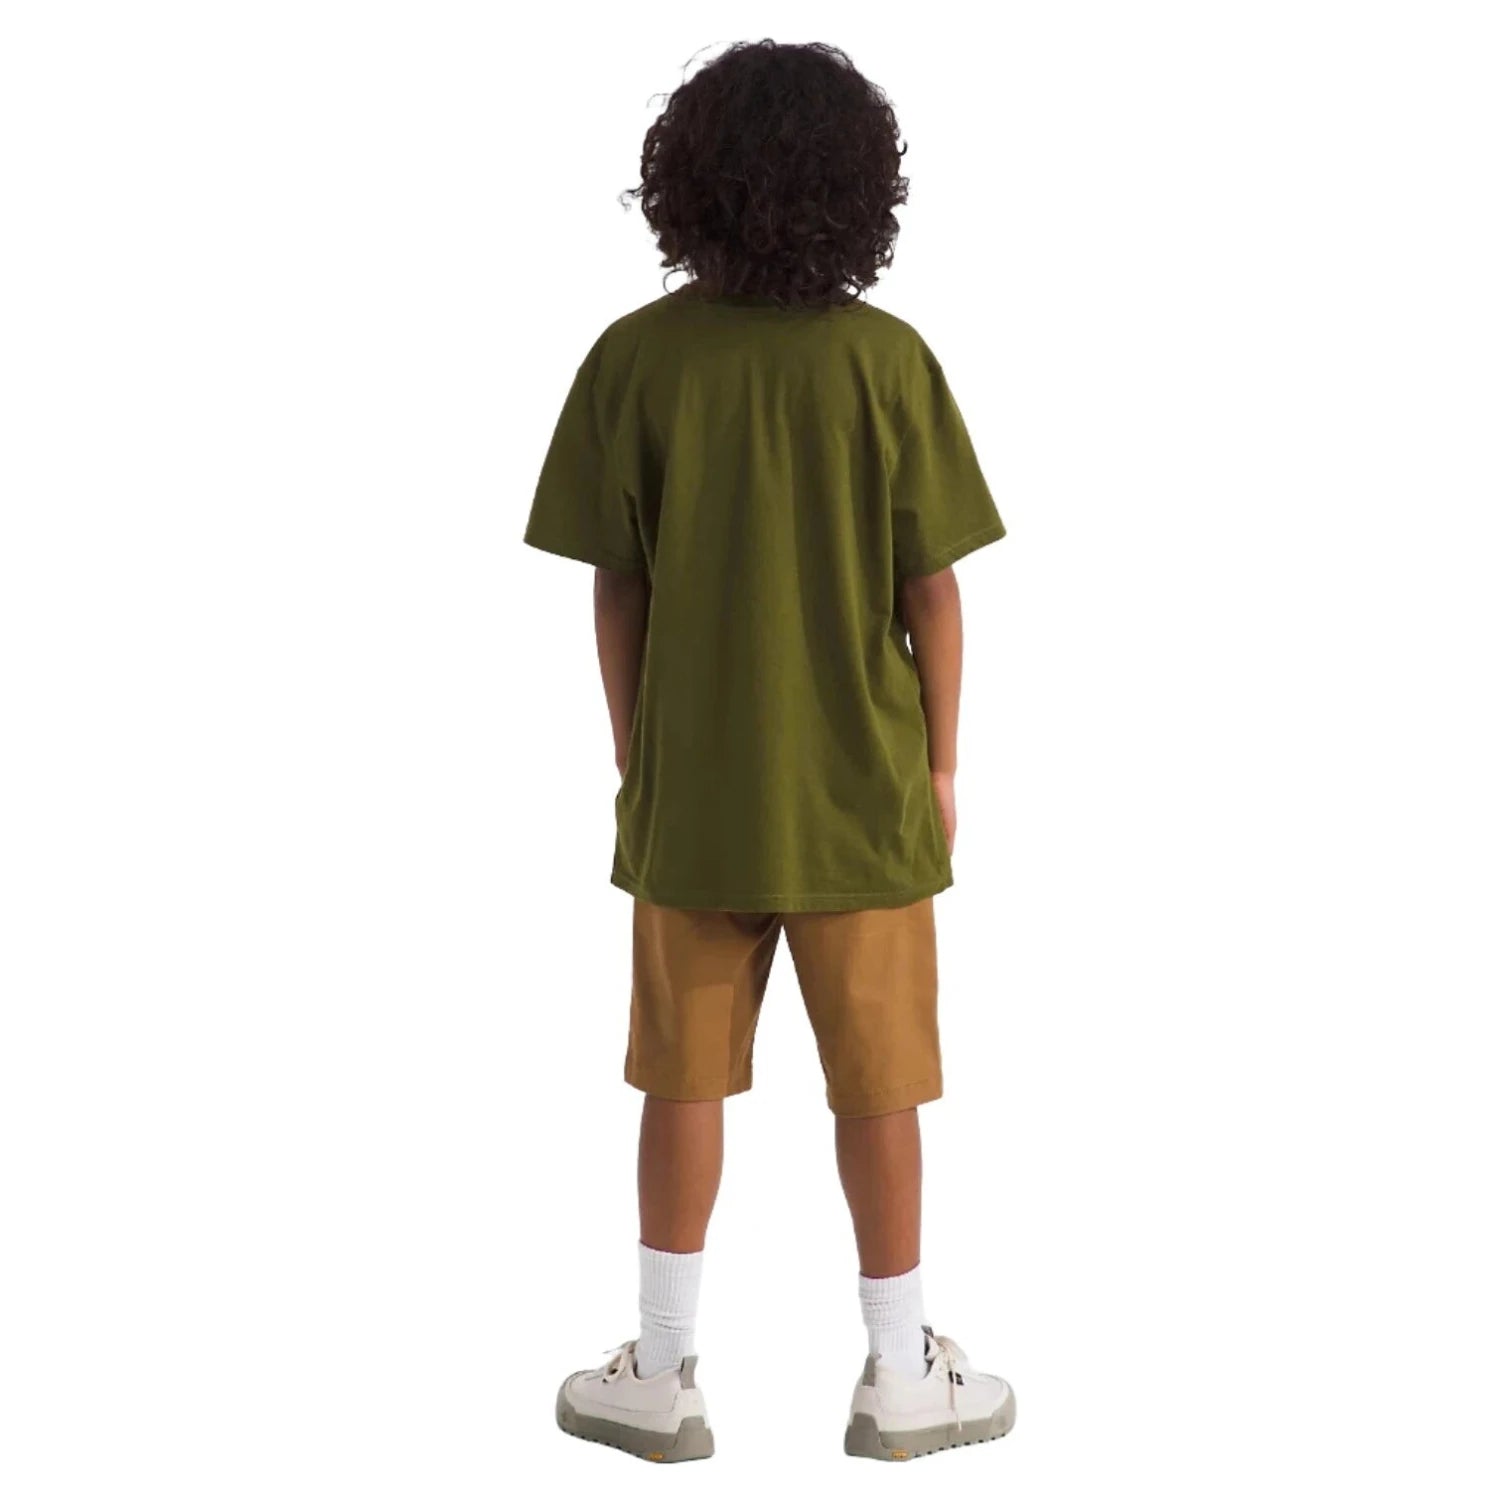 The North Face K's Short-Sleeve Graphic Tee, Forest Olive, back view on model